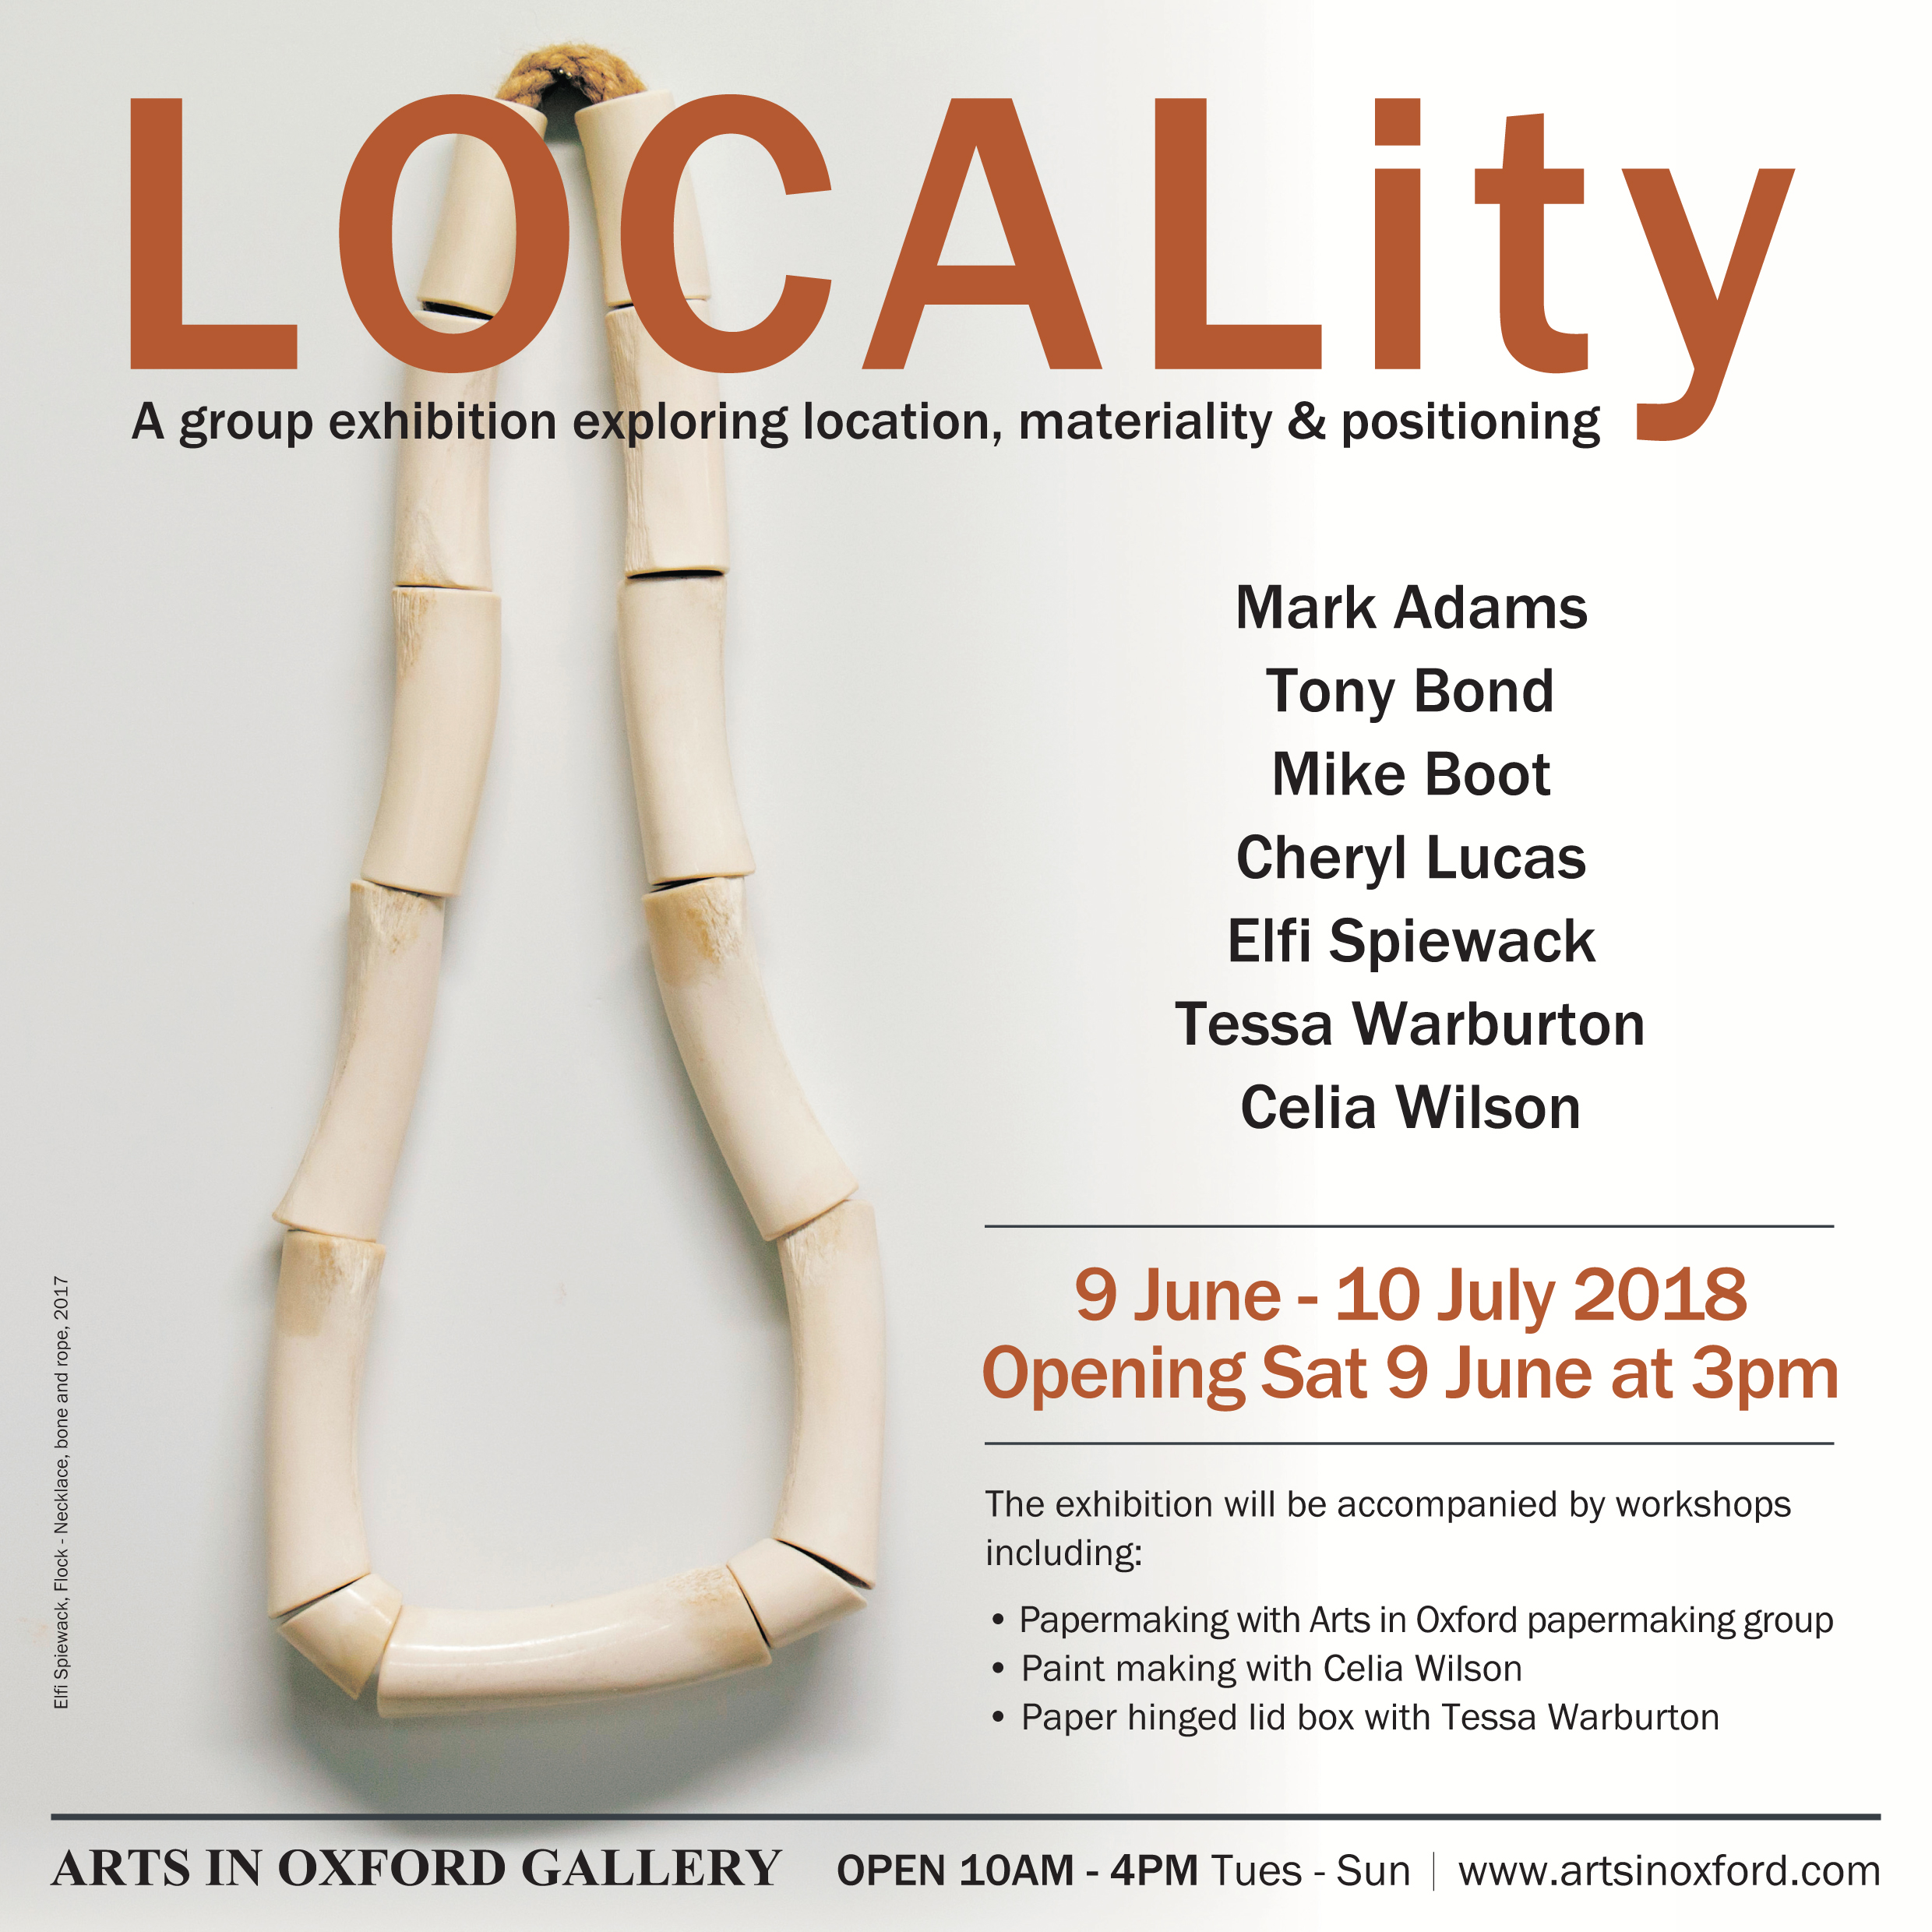 LOCALITY JUNE-JULY